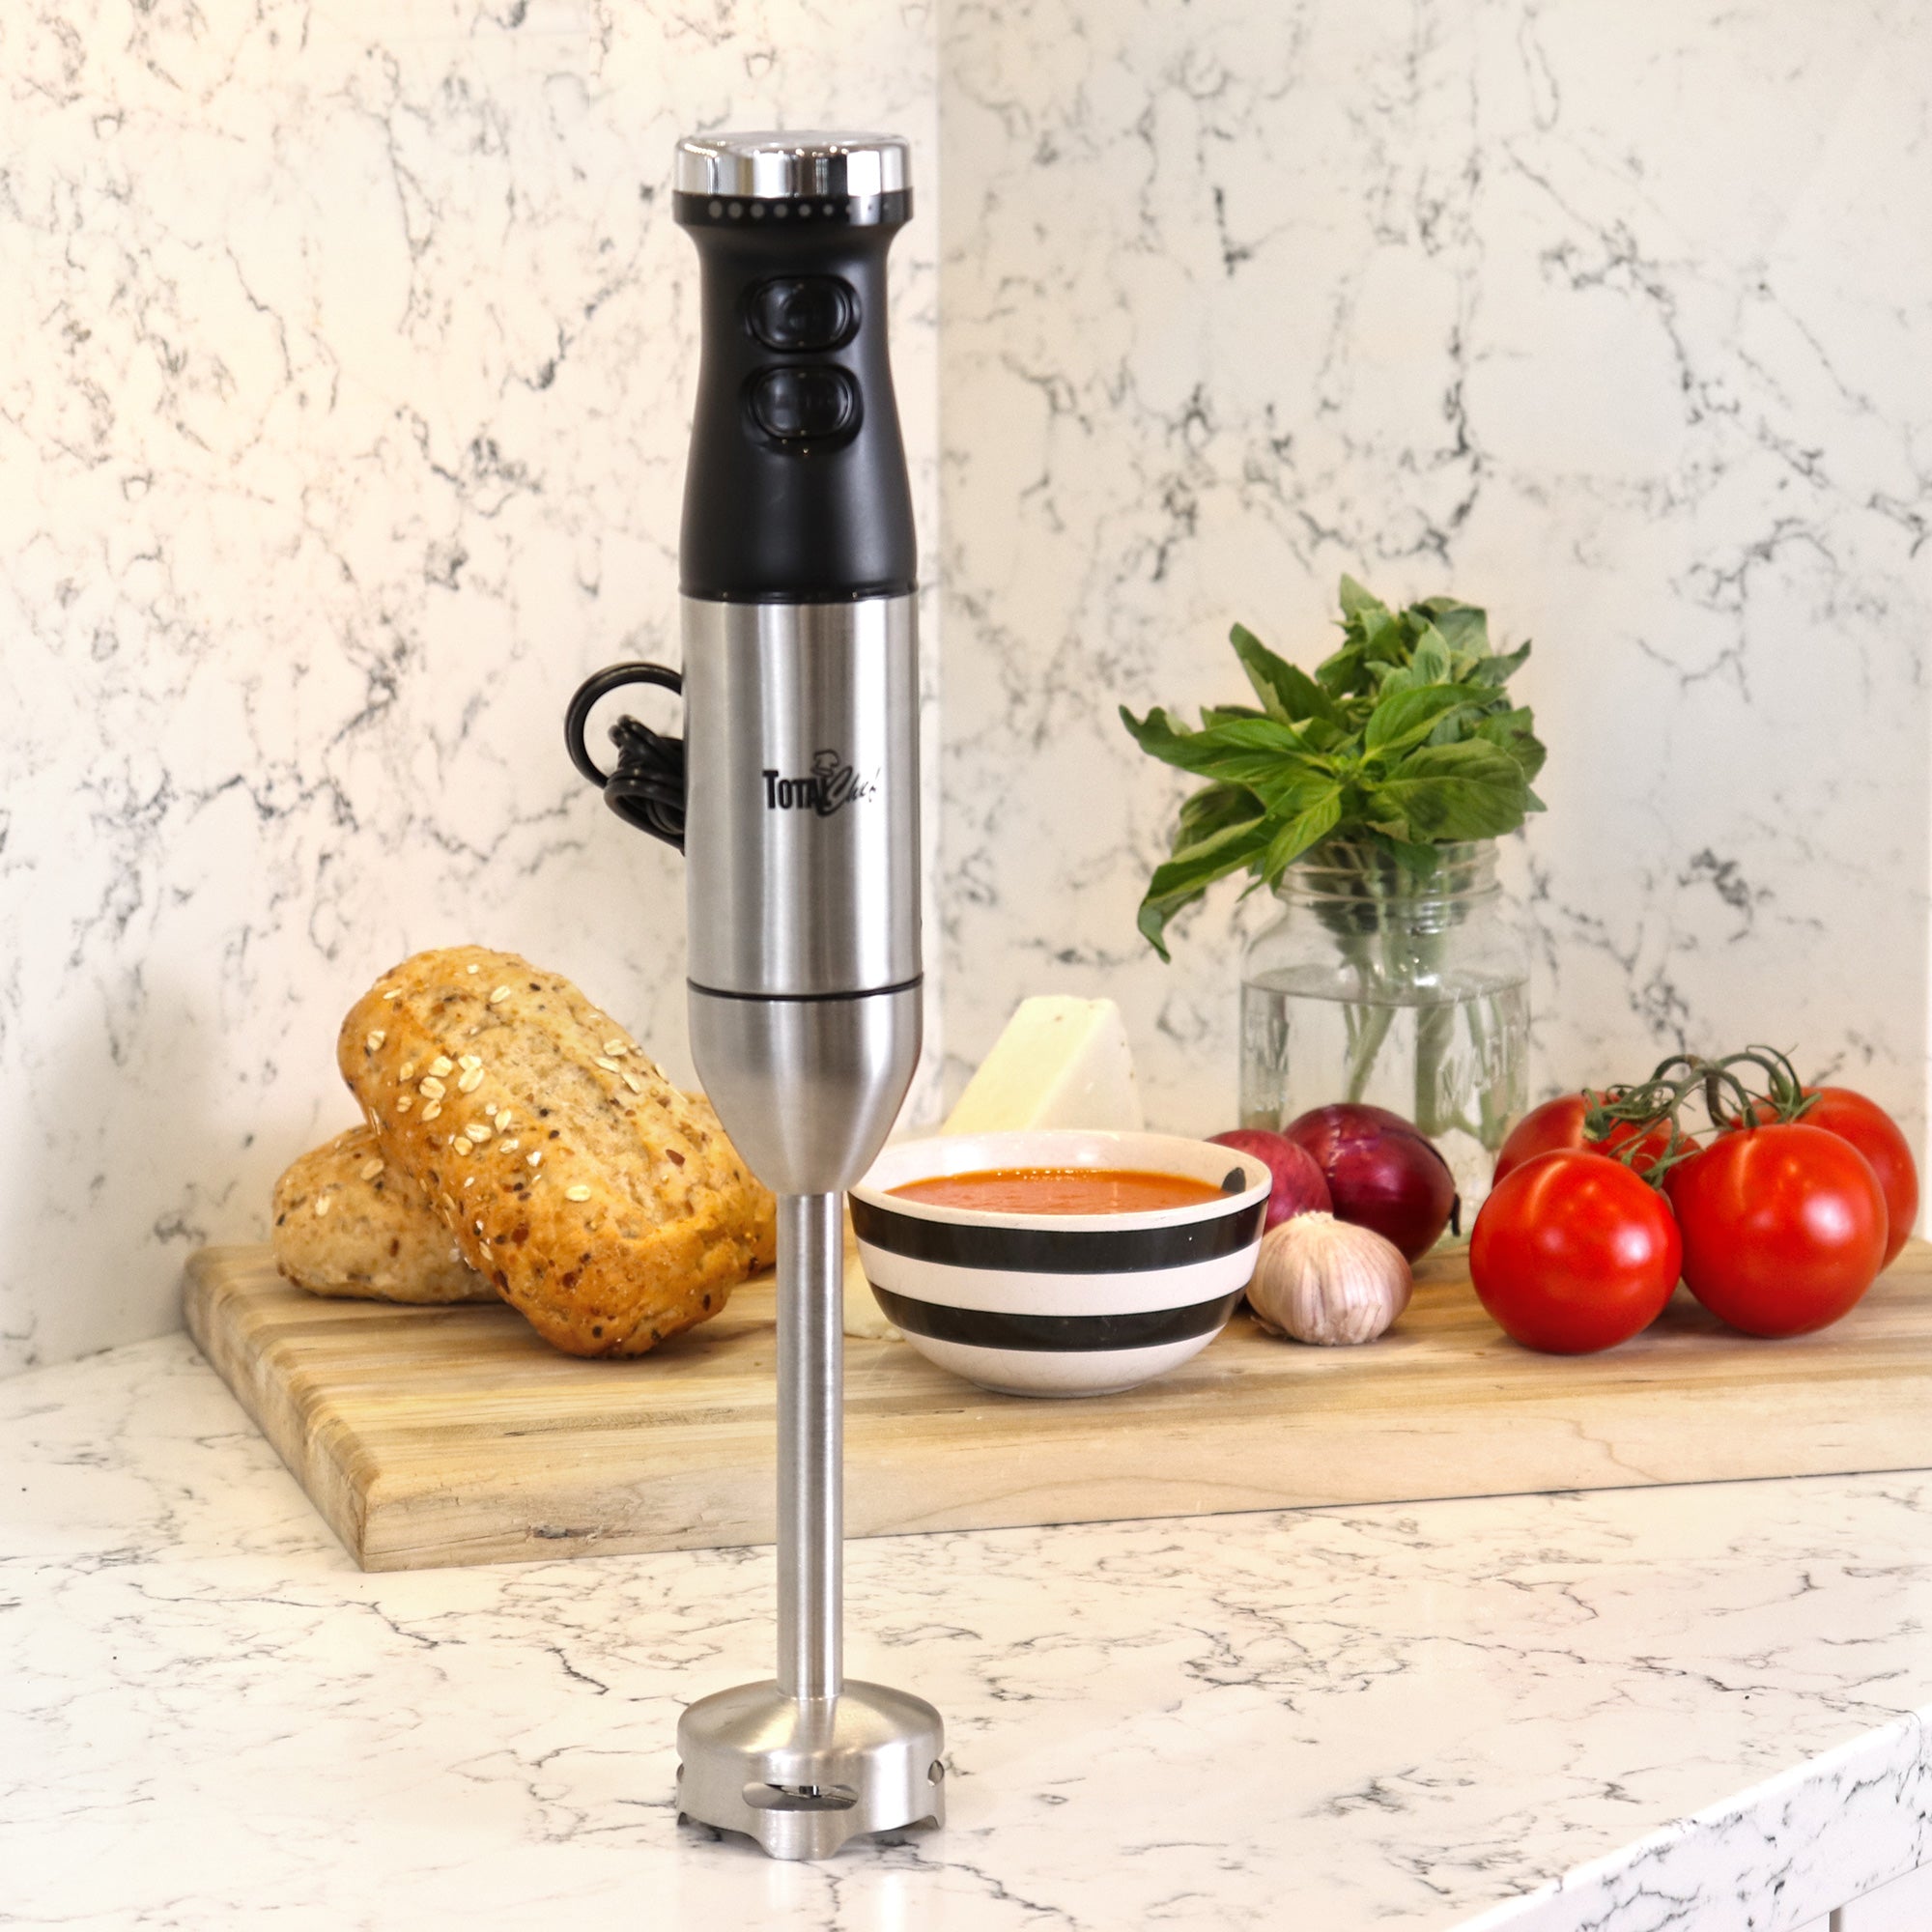 Lifestyle image of blender standing upright on a marbled white counter in front of a wooden cutting board with small loaves of bread, a bowl of soup, tomatoes, garlic, and basil behind it